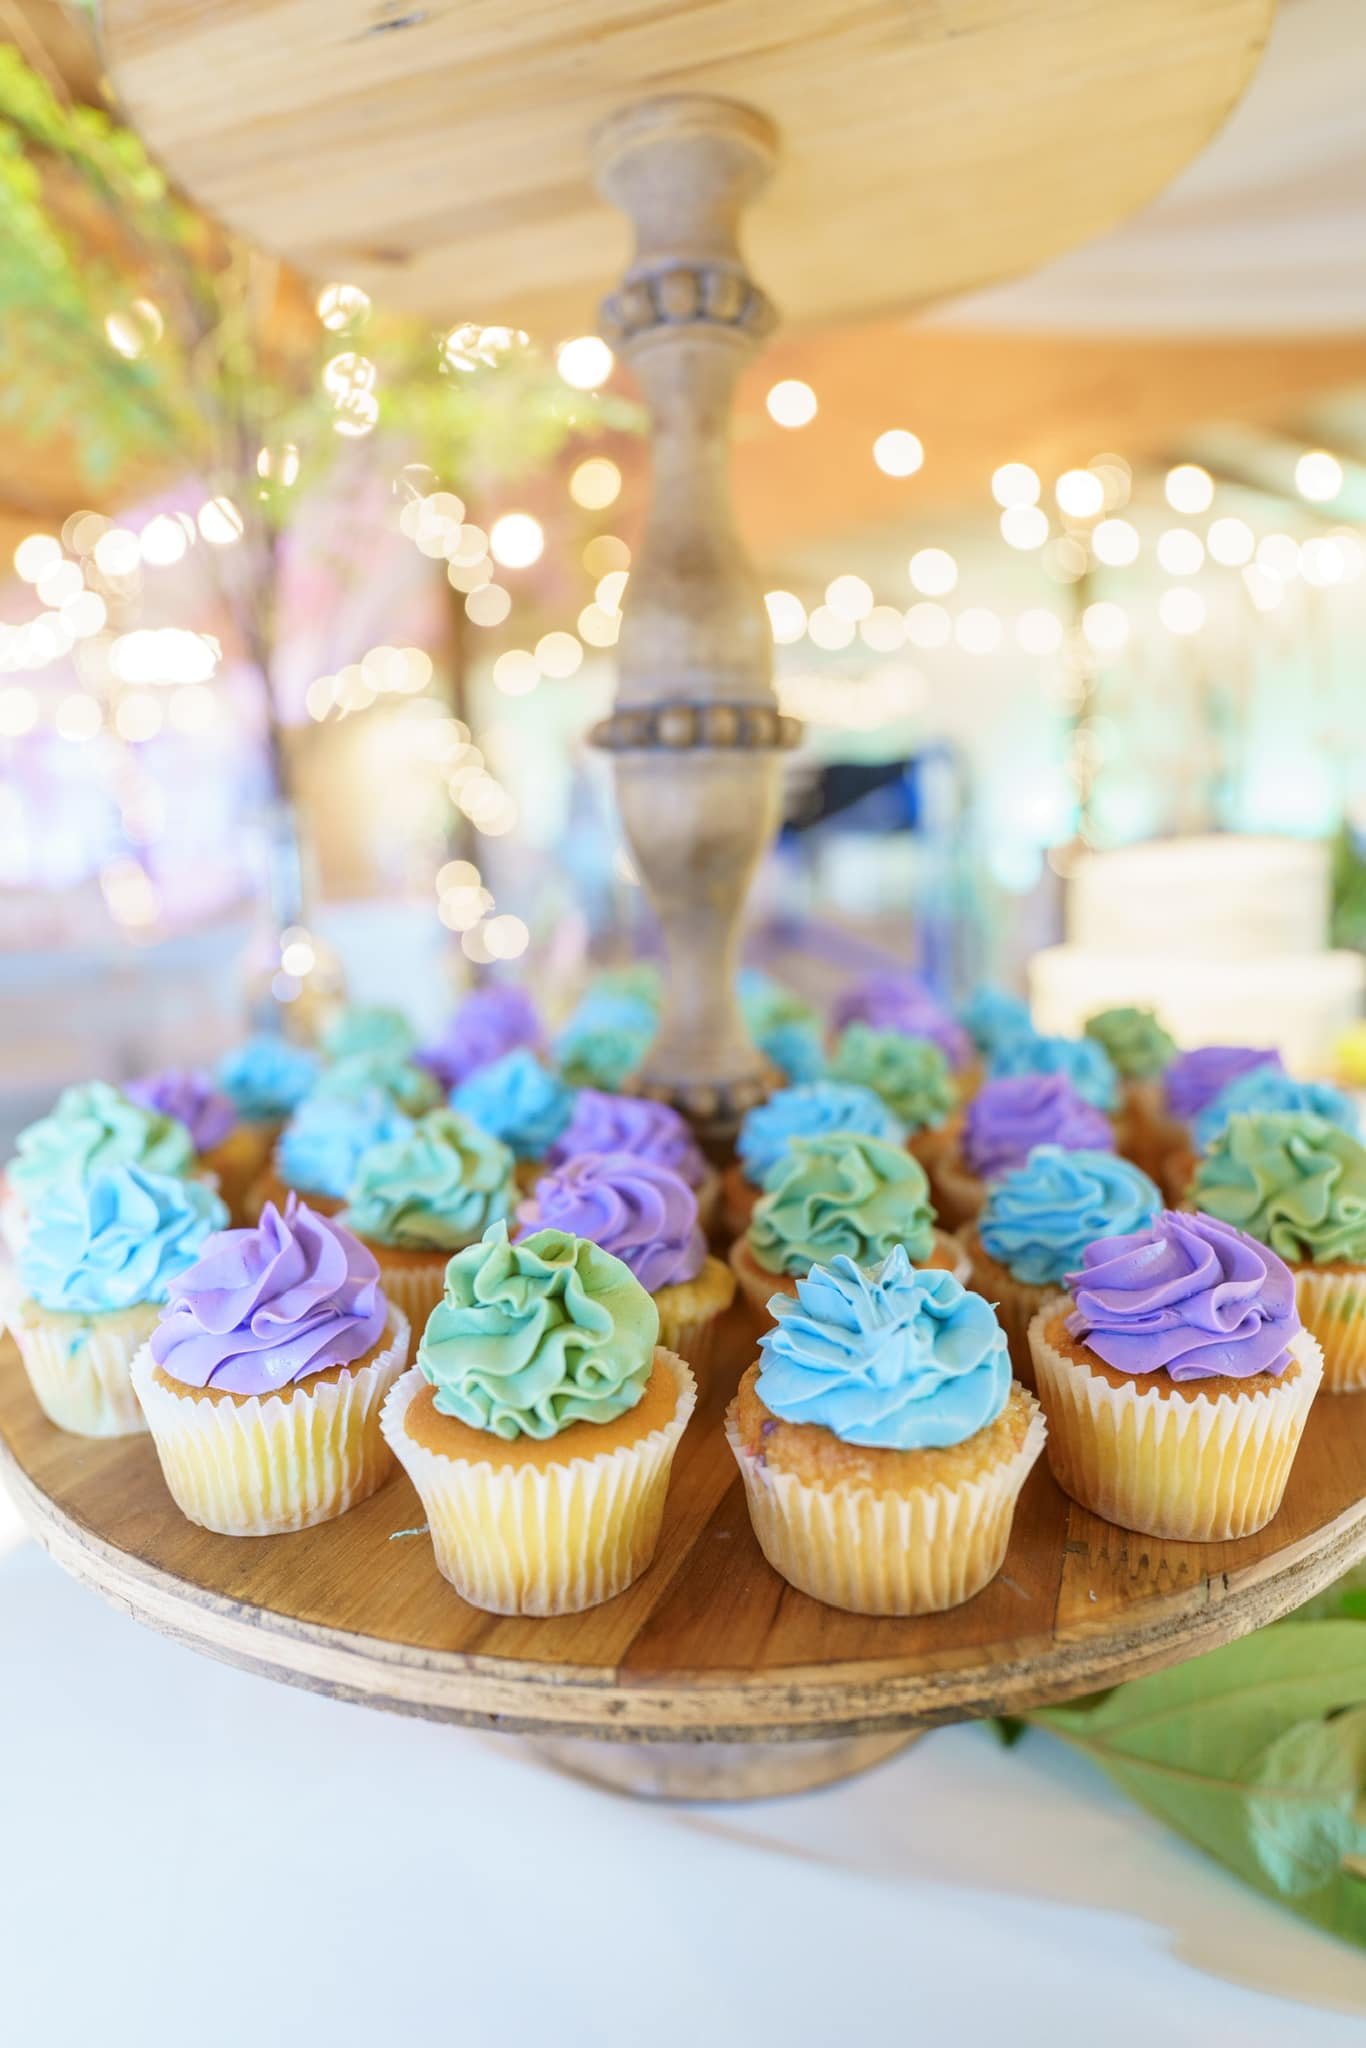 Cool-Pastel-Cupcakes-Sparkly-Fairy-Lights-.jpg